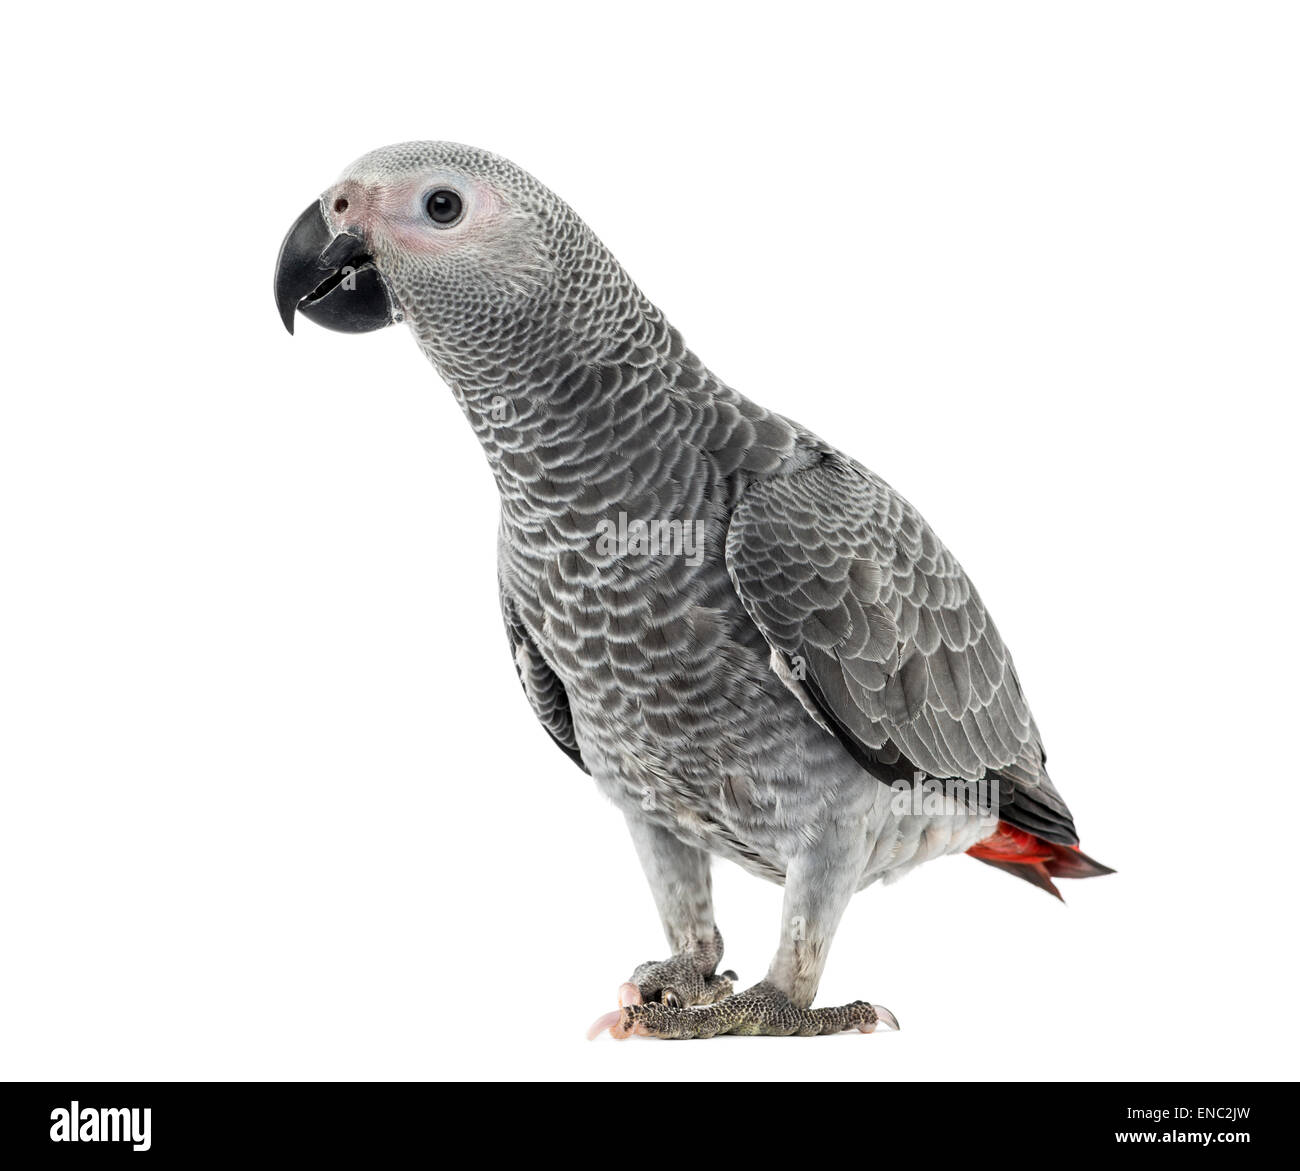 Page 2 African Grey Parrot High Resolution Stock Photography and - Alamy